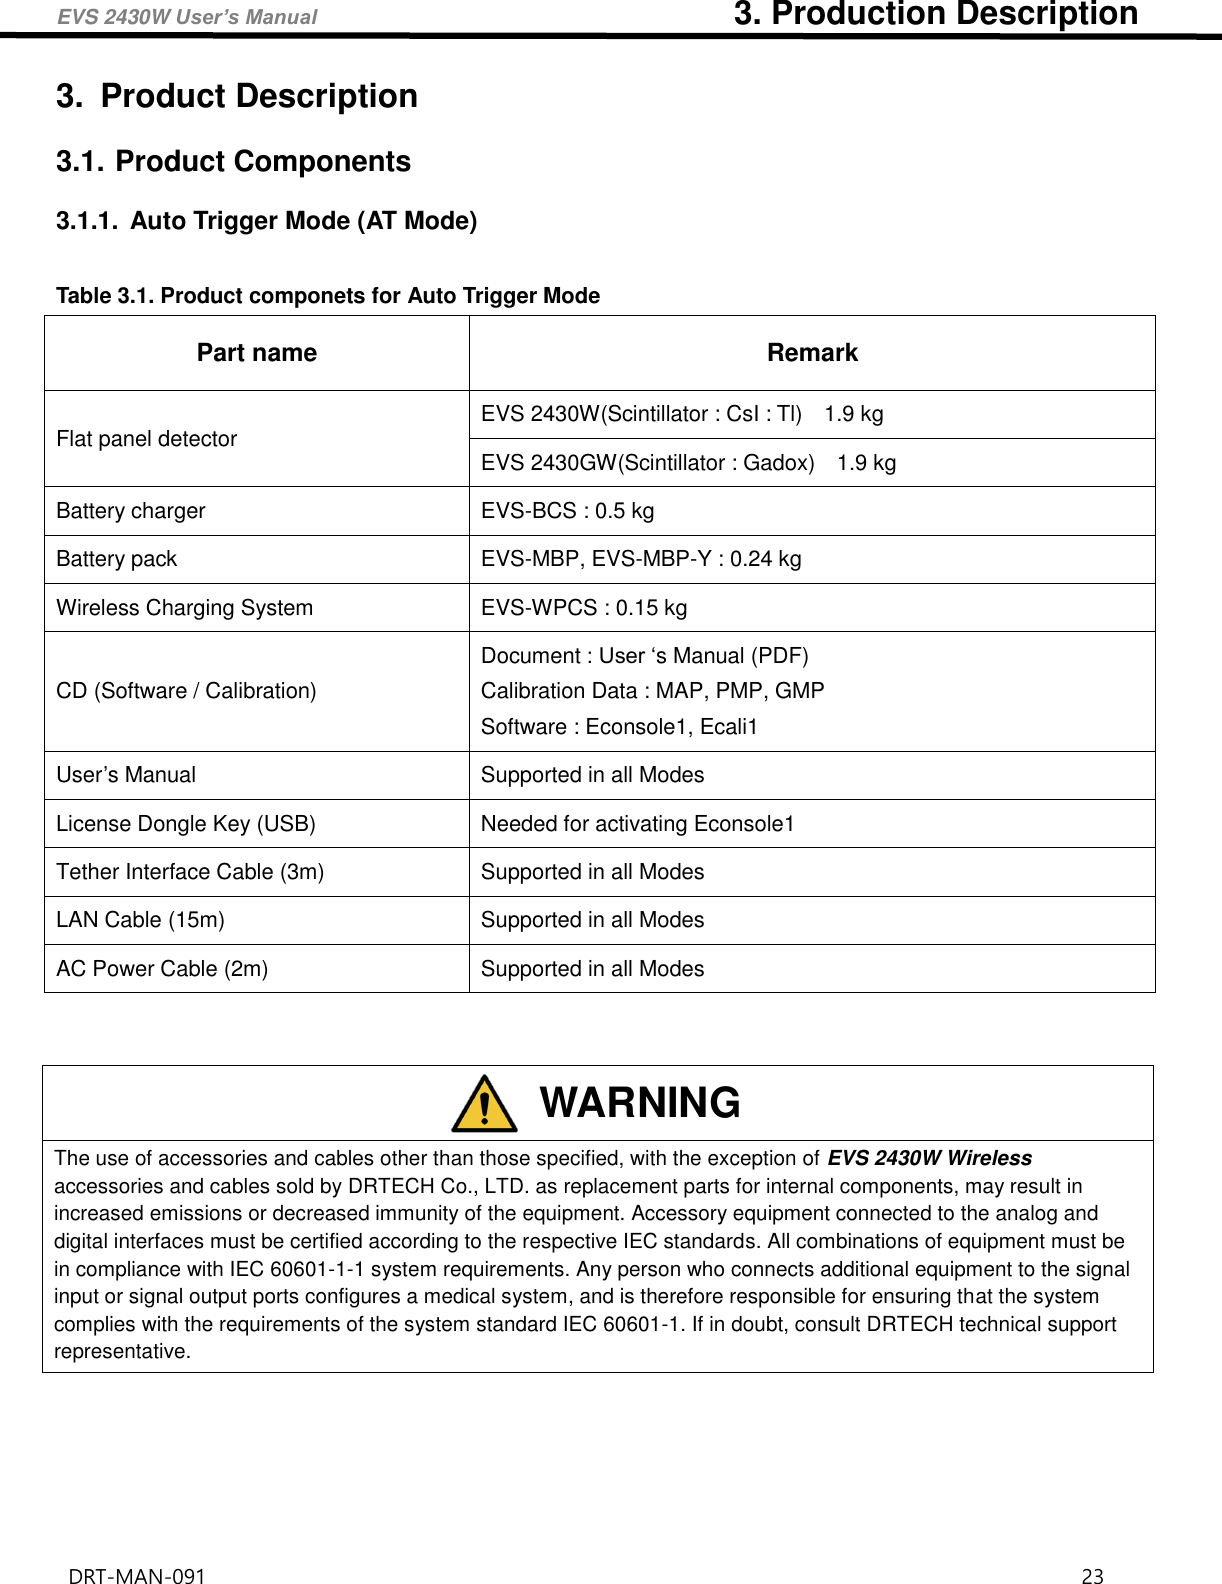 EVS 2430W User’s Manual                                                  3. Production Description DRT-MAN-091                                                                                    23   3.  Product Description 3.1. Product Components 3.1.1.  Auto Trigger Mode (AT Mode)  Table 3.1. Product componets for Auto Trigger Mode Part name Remark Flat panel detector EVS 2430W(Scintillator : CsI : Tl)    1.9 kg EVS 2430GW(Scintillator : Gadox)    1.9 kg Battery charger   EVS-BCS : 0.5 kg Battery pack EVS-MBP, EVS-MBP-Y : 0.24 kg Wireless Charging System EVS-WPCS : 0.15 kg CD (Software / Calibration) Document : User ‘s Manual (PDF)   Calibration Data : MAP, PMP, GMP Software : Econsole1, Ecali1 User’s Manual   Supported in all Modes License Dongle Key (USB) Needed for activating Econsole1 Tether Interface Cable (3m)   Supported in all Modes LAN Cable (15m) Supported in all Modes AC Power Cable (2m) Supported in all Modes    WARNING The use of accessories and cables other than those specified, with the exception of EVS 2430W Wireless accessories and cables sold by DRTECH Co., LTD. as replacement parts for internal components, may result in increased emissions or decreased immunity of the equipment. Accessory equipment connected to the analog and digital interfaces must be certified according to the respective IEC standards. All combinations of equipment must be in compliance with IEC 60601-1-1 system requirements. Any person who connects additional equipment to the signal input or signal output ports configures a medical system, and is therefore responsible for ensuring that the system complies with the requirements of the system standard IEC 60601-1. If in doubt, consult DRTECH technical support representative.    